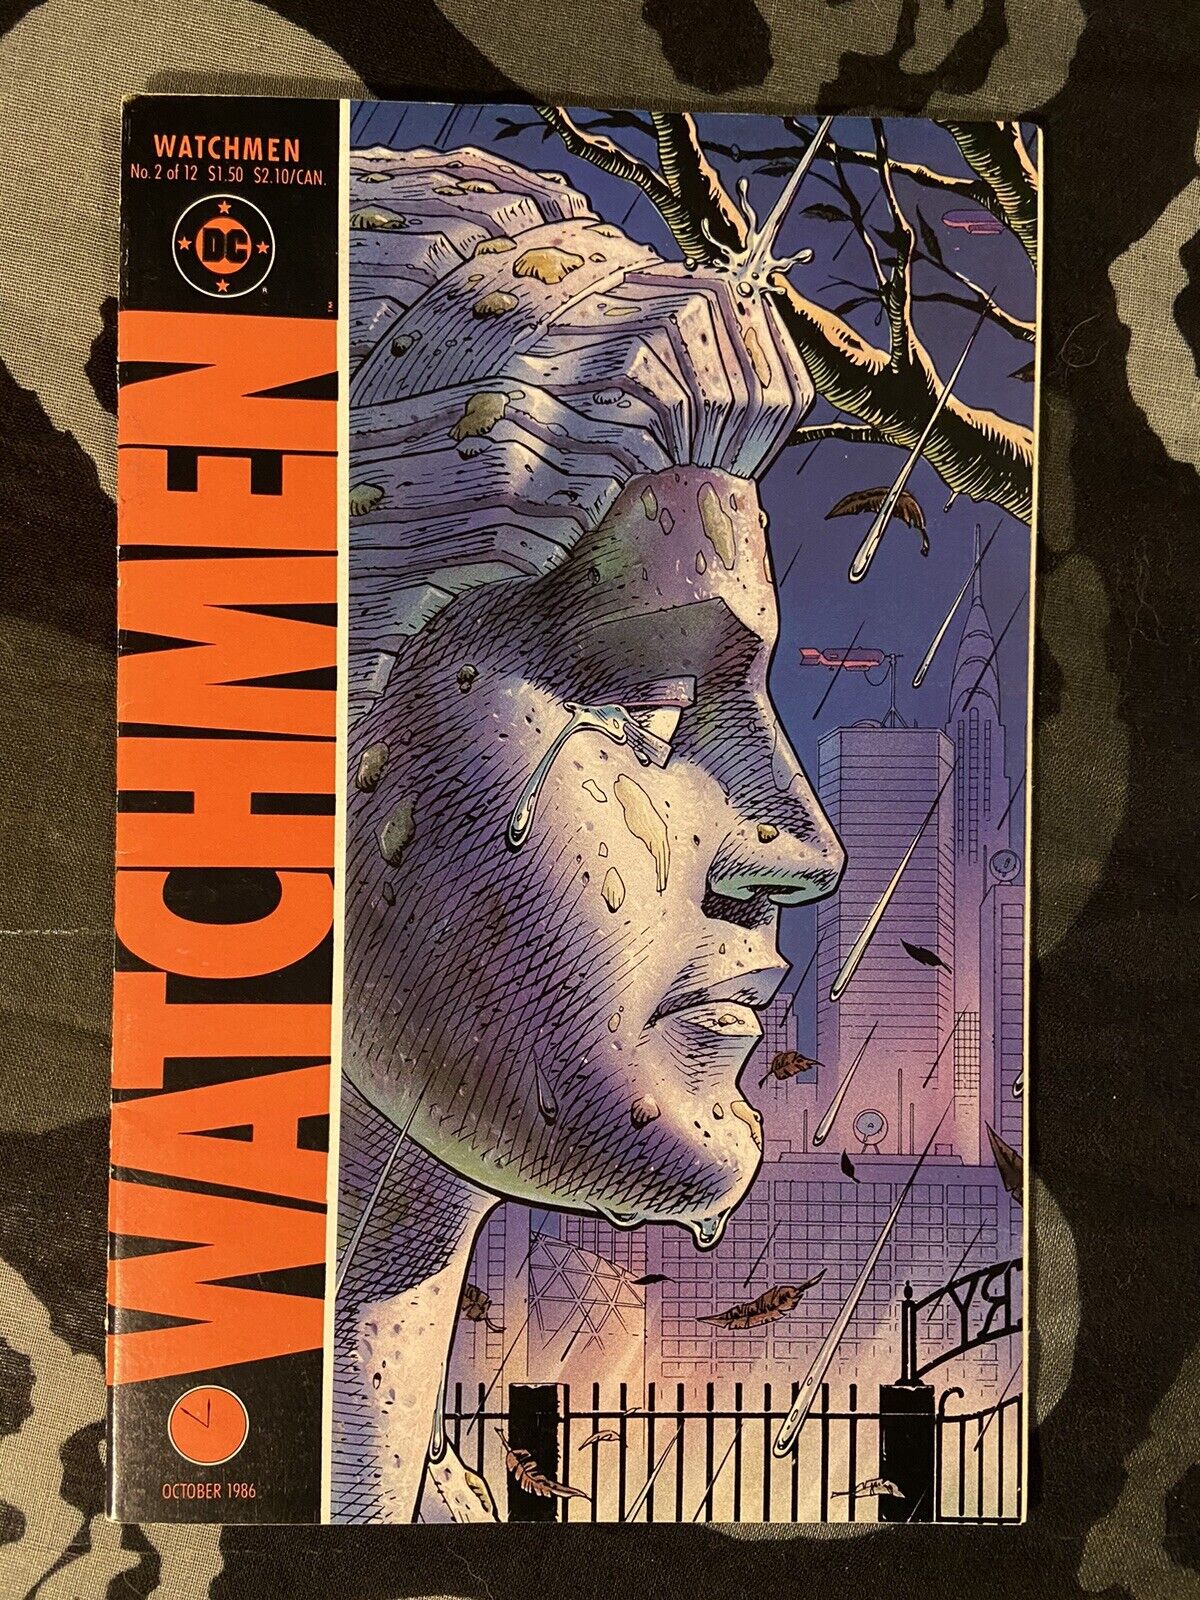 WATCHMEN #2 (1986) 1st APPEARANCE OF DOLLAR BILL ALAN MOORE DAVE GIBBONS